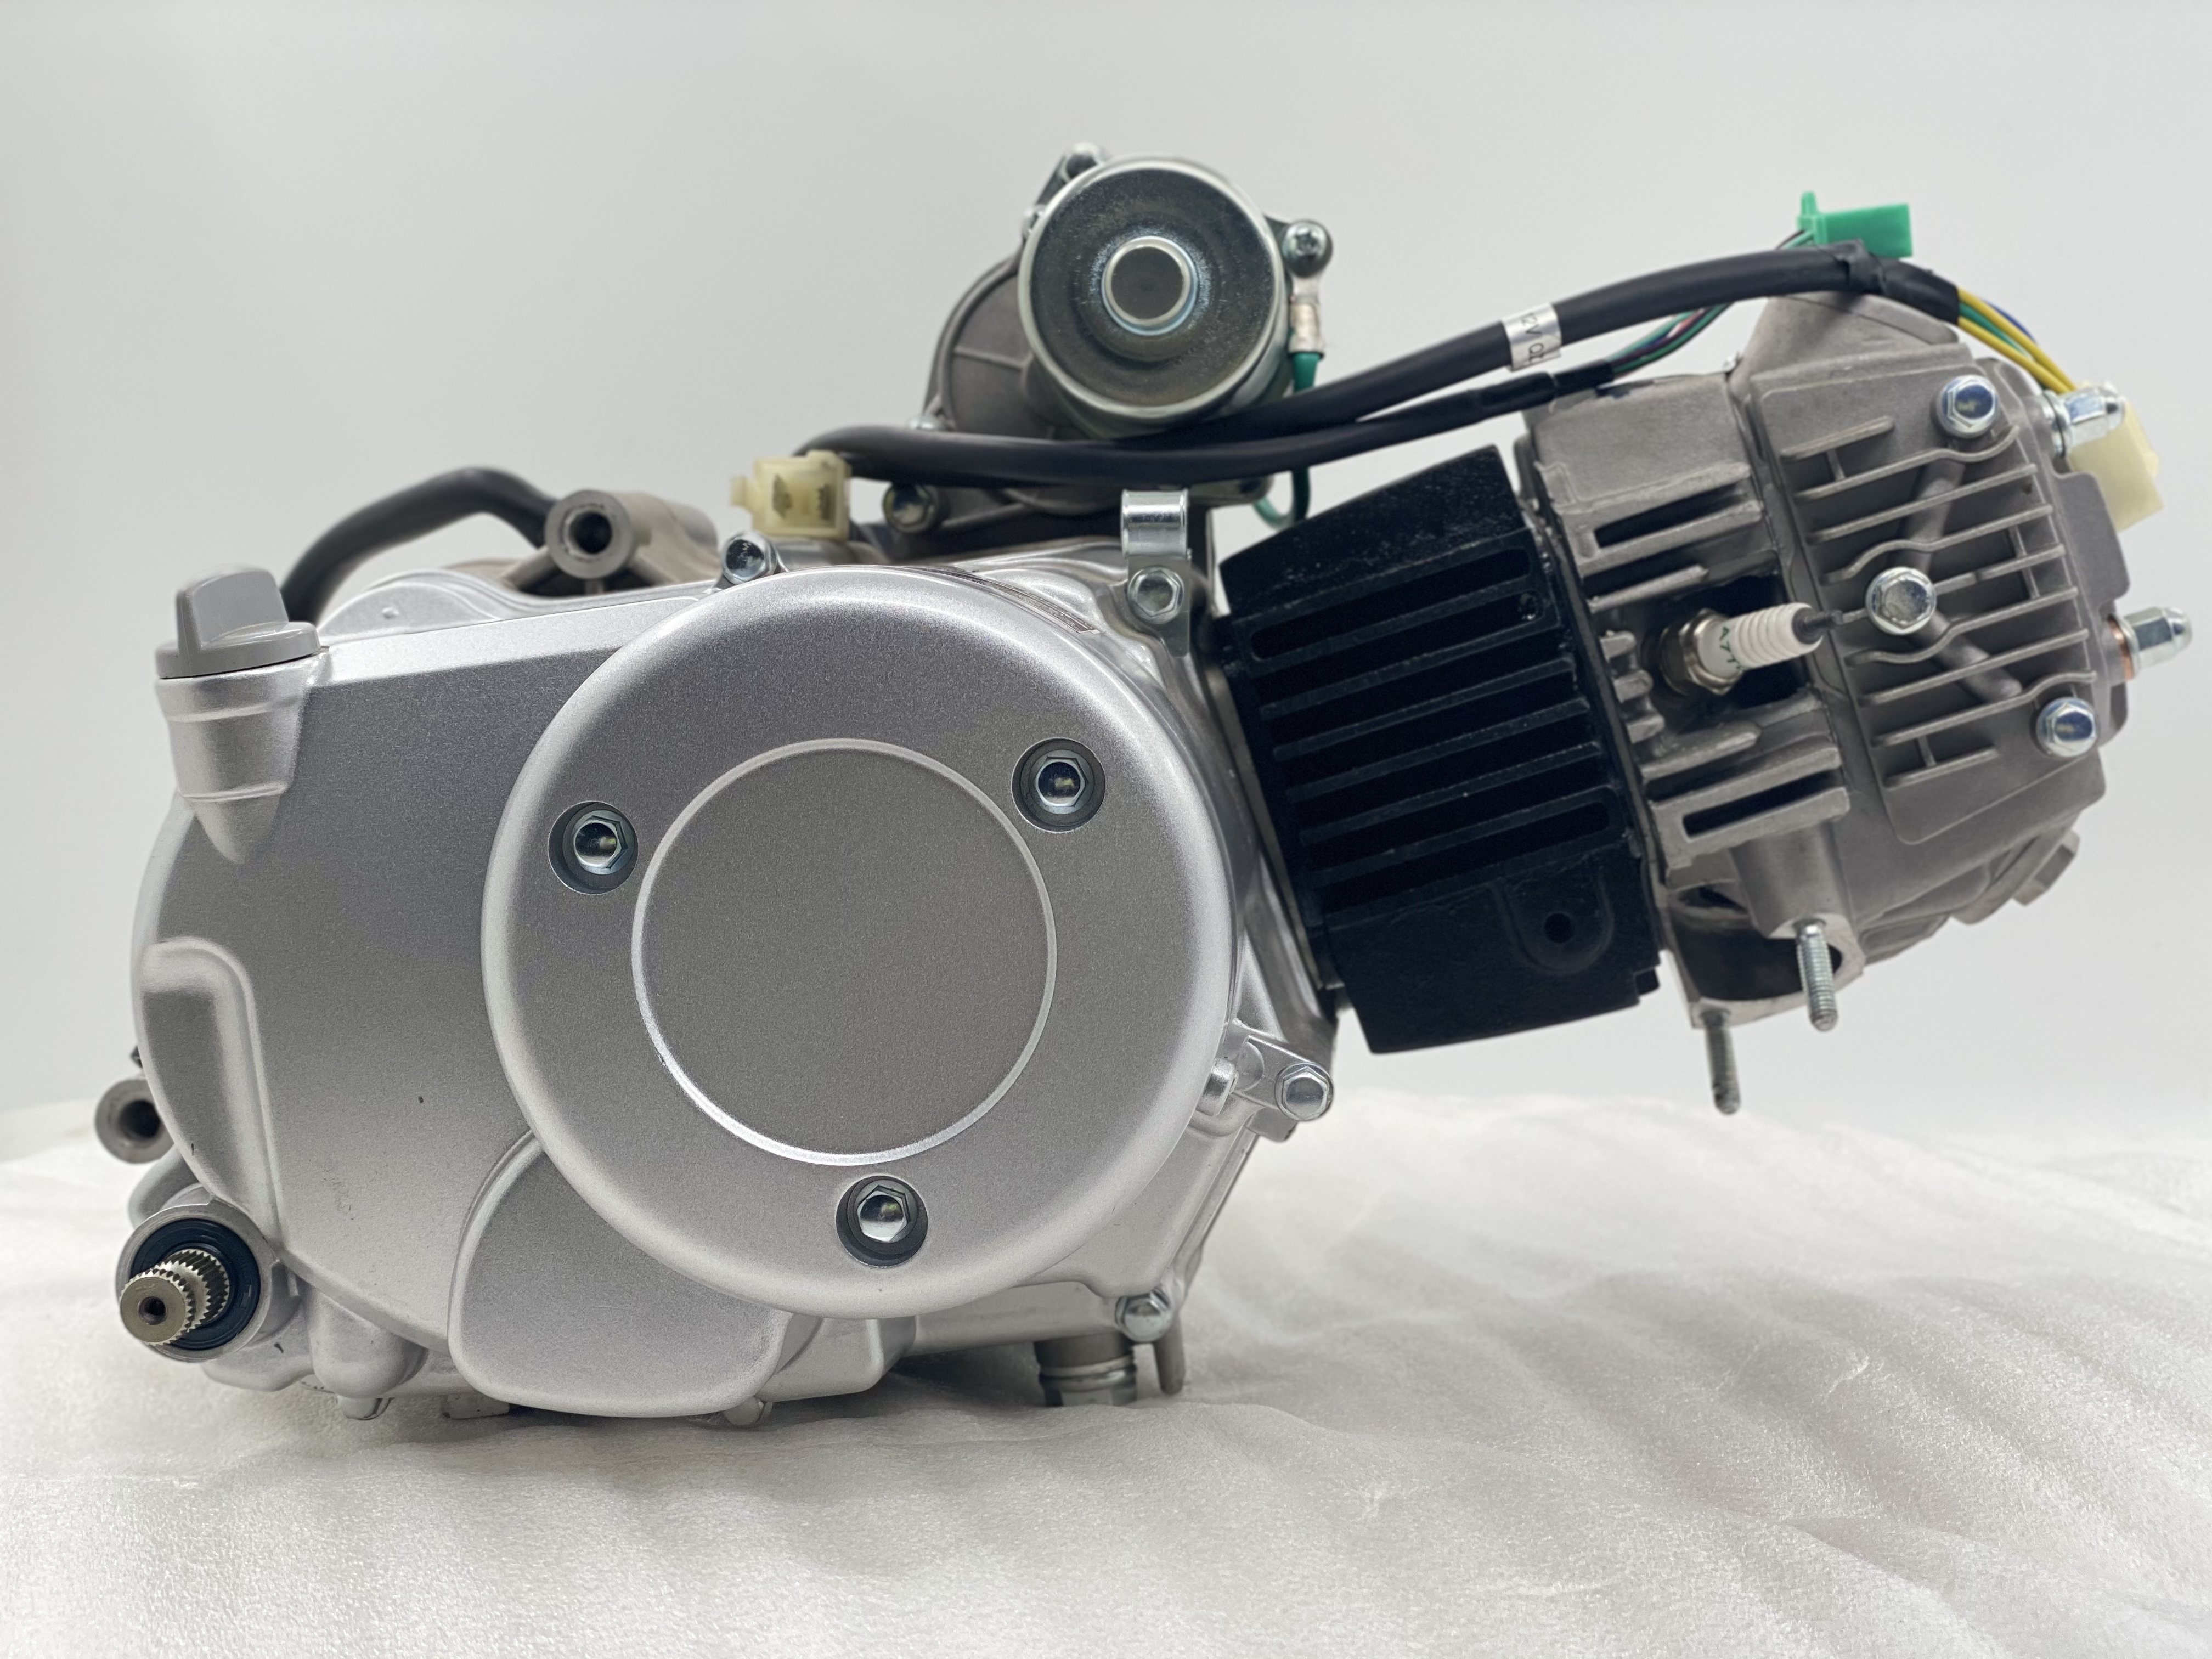 DAYANG China Factory cheap price sliver model 70cc Engine Assembly for tricycle ATV UTV Sales Origin Warranty Service